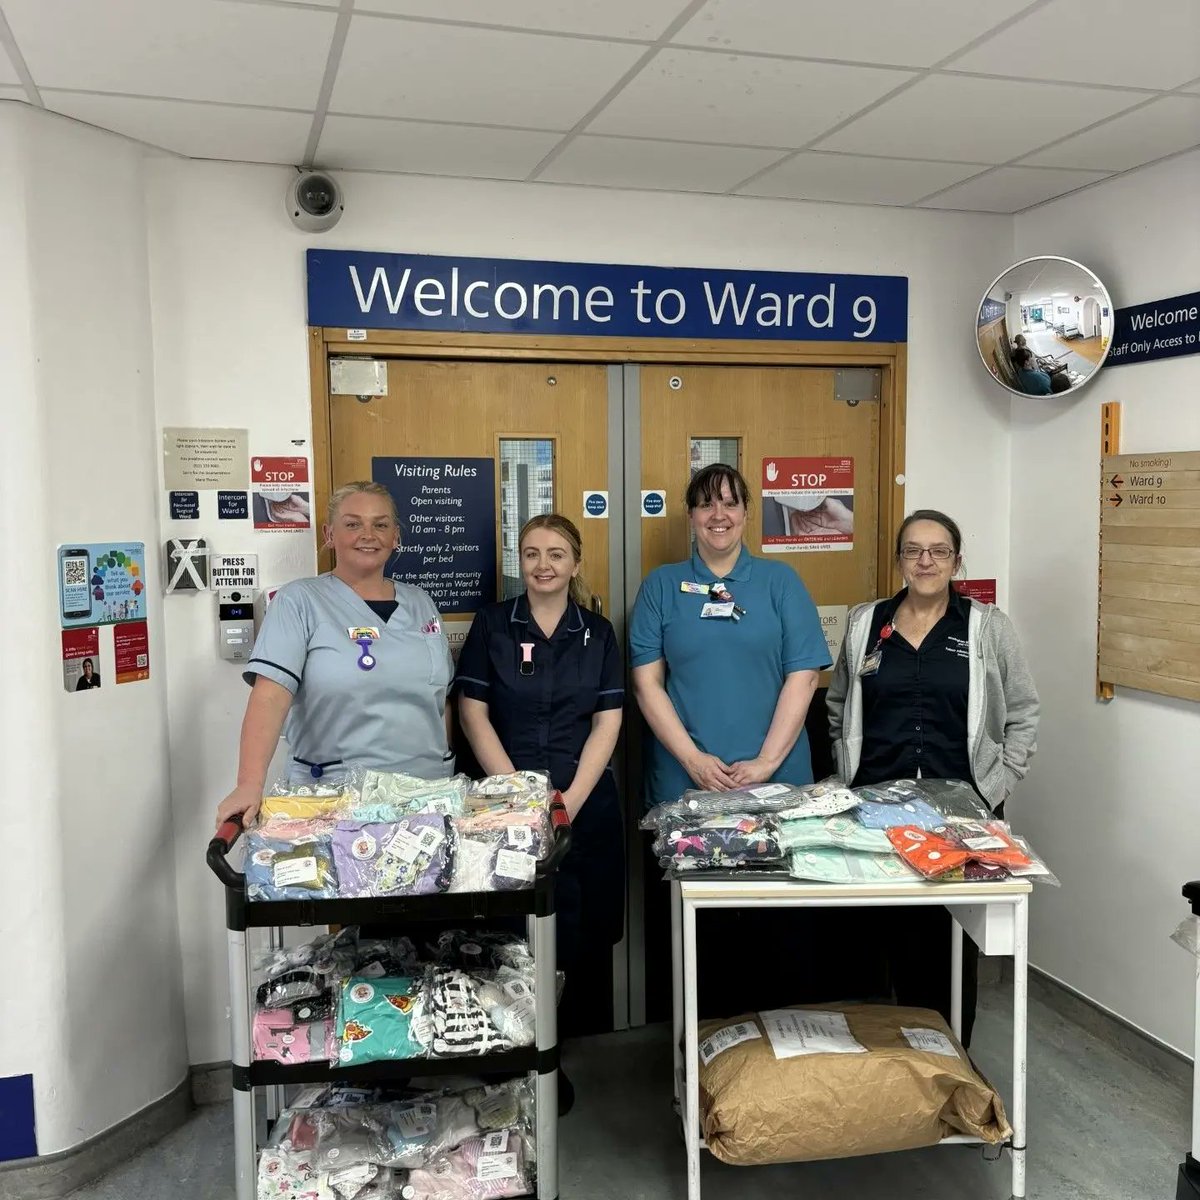 Here's some of the super staff from @Bham_Childrens receiving a donation of pyjamas ♥️ They say, 'We are overwhelmed with such an amazing and generous donation!!! The pyjamas are so lovely and will really make such a difference to our patients.' #Birmingham #charity